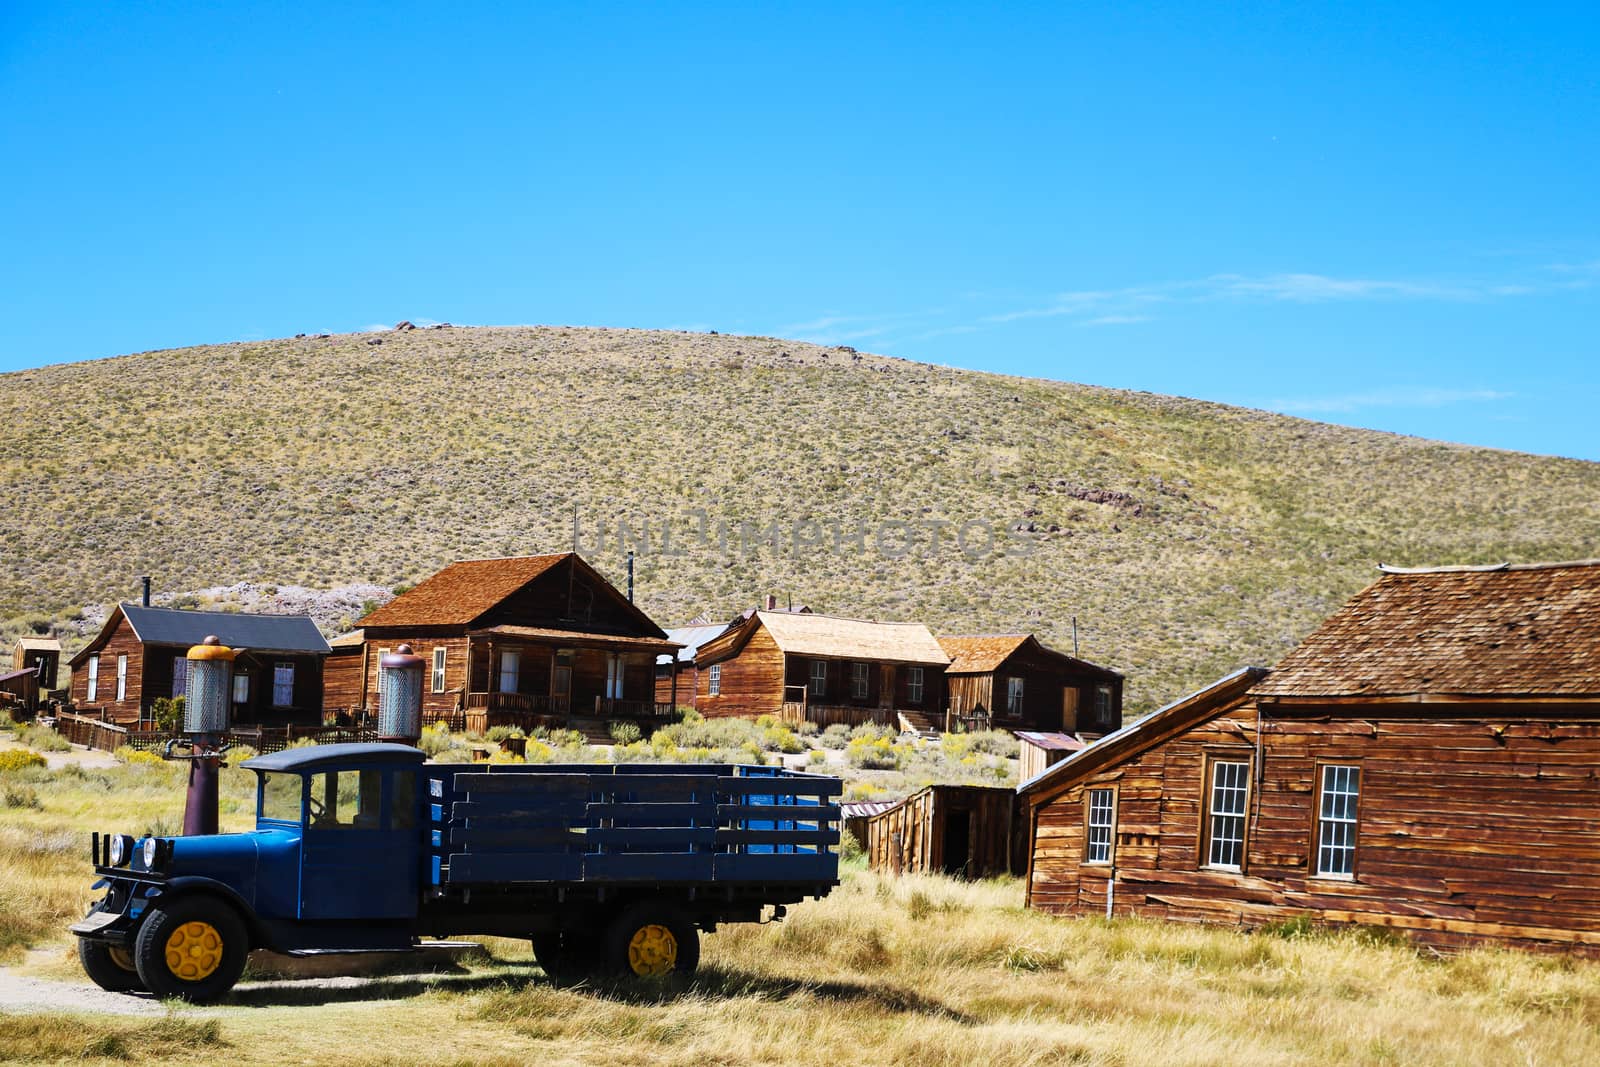 The ghost town of Bodie - California, USA. by kip02kas